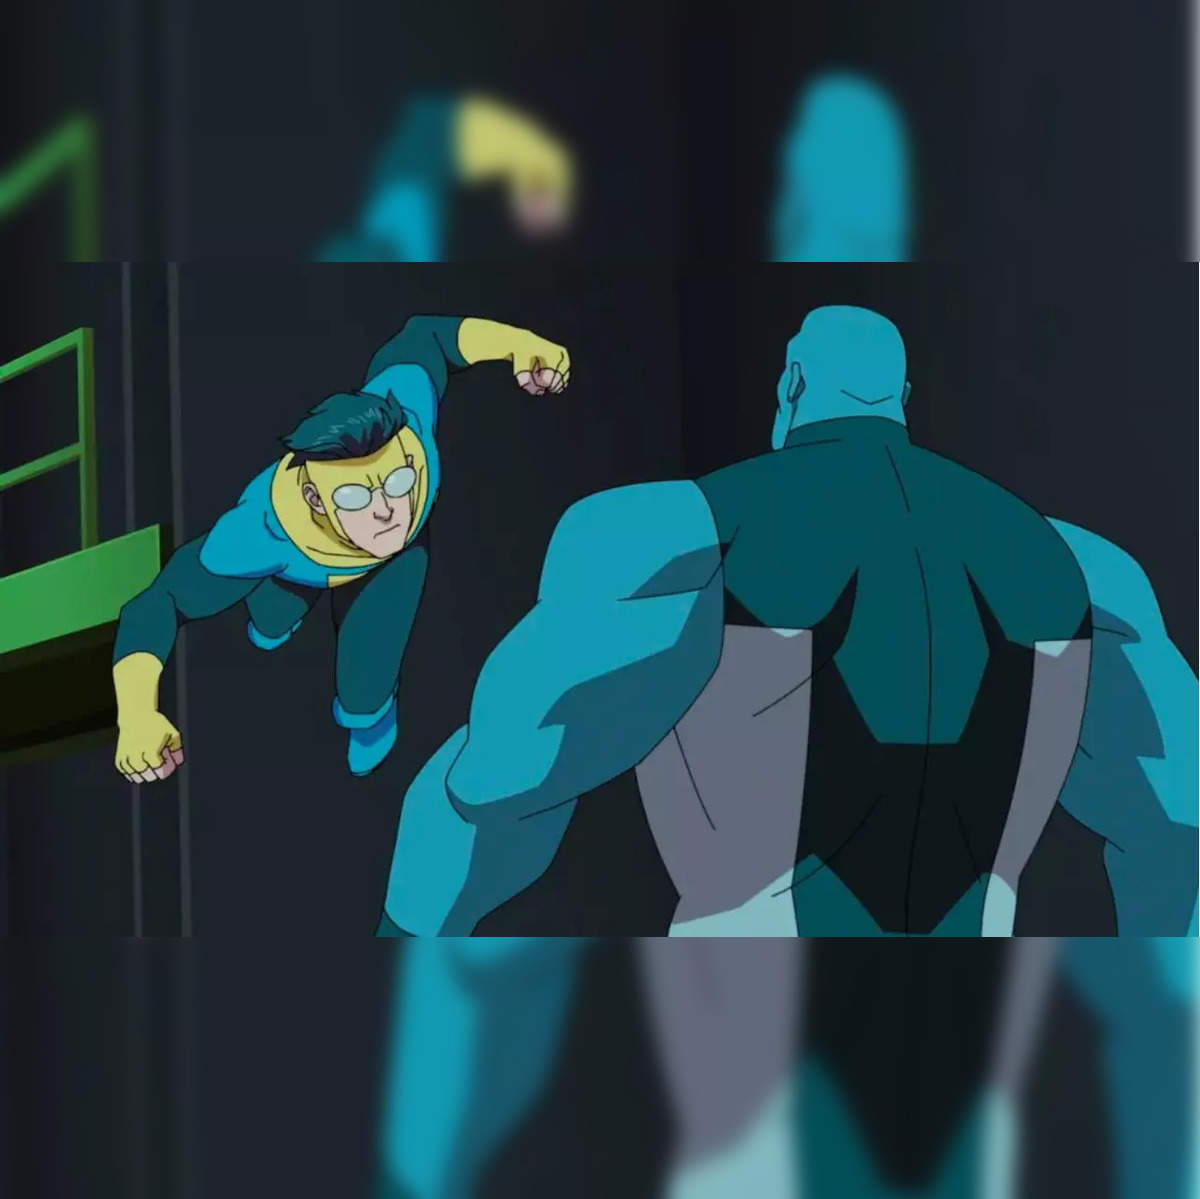 Invincible season 2 part 2: confirmed cast, plot speculation and what we  know so far